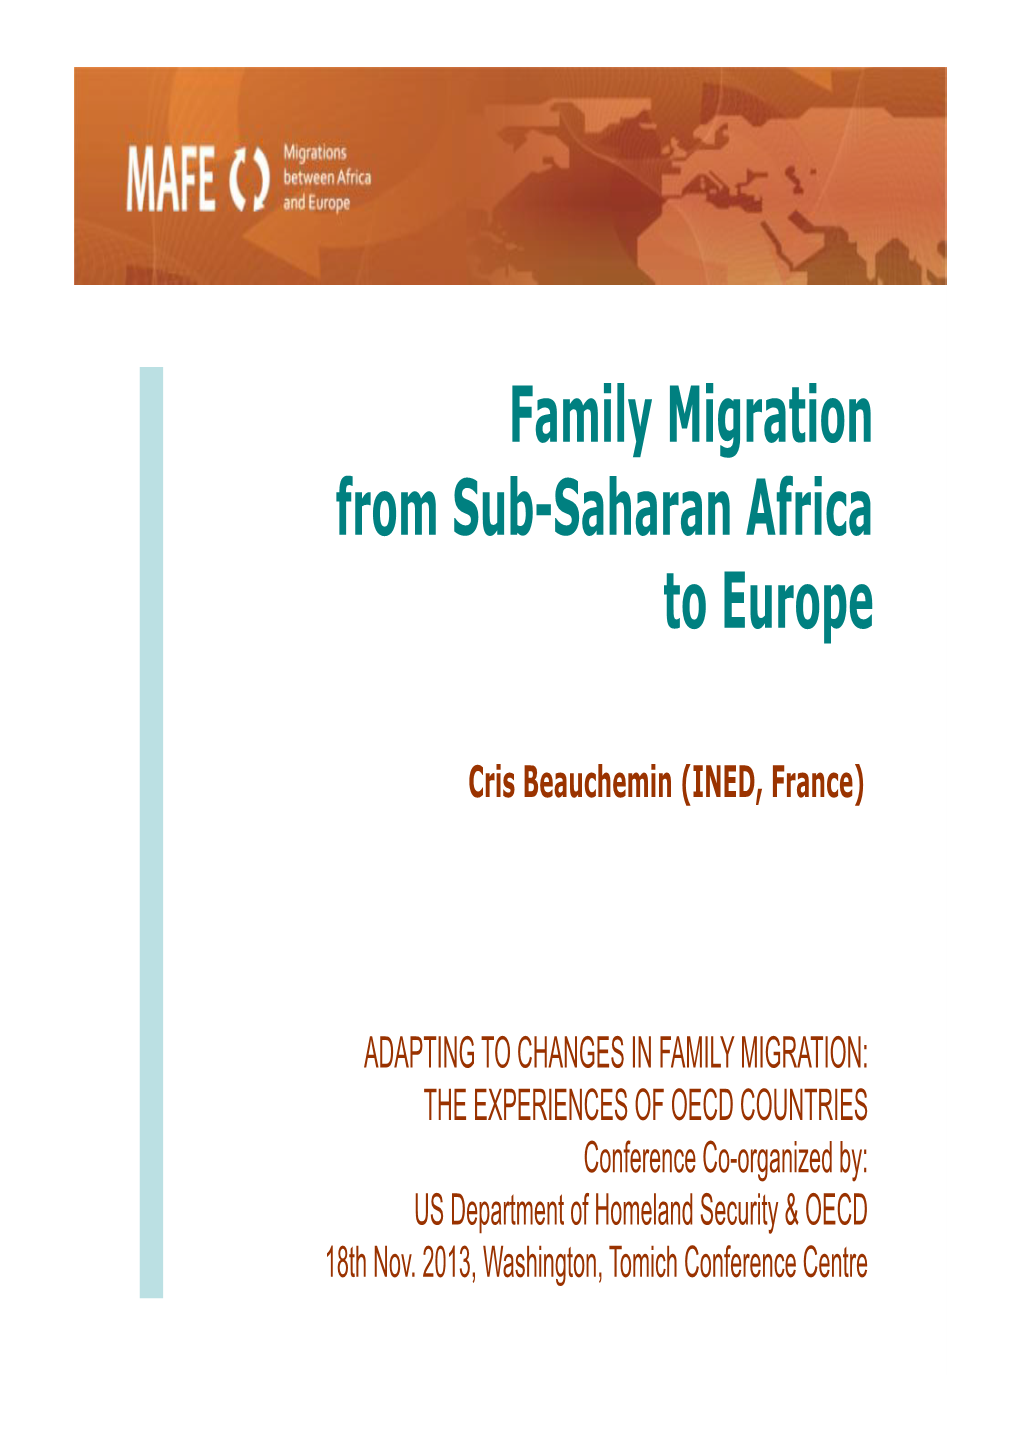 Family Migration from Sub-Saharan Africa to Europe